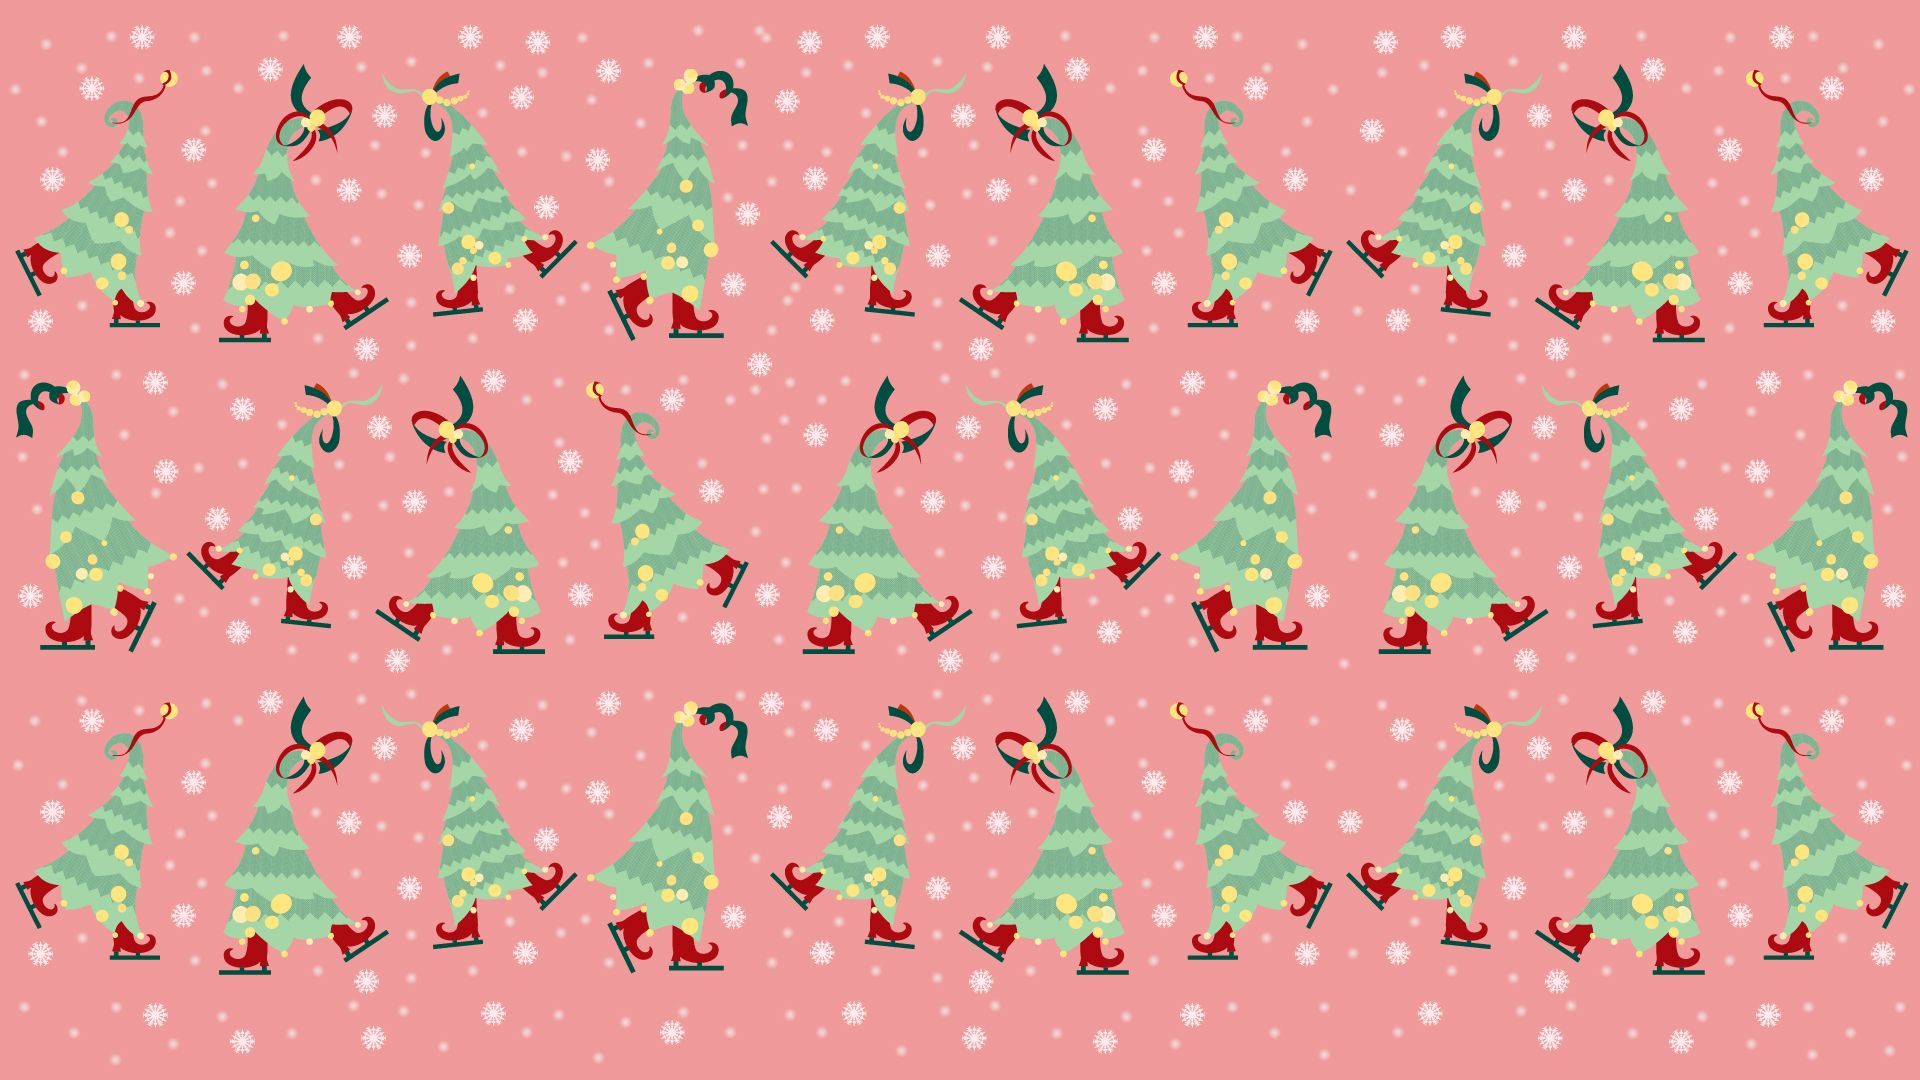 100+] Cute Christmas Laptop Wallpapers | Wallpapers.com